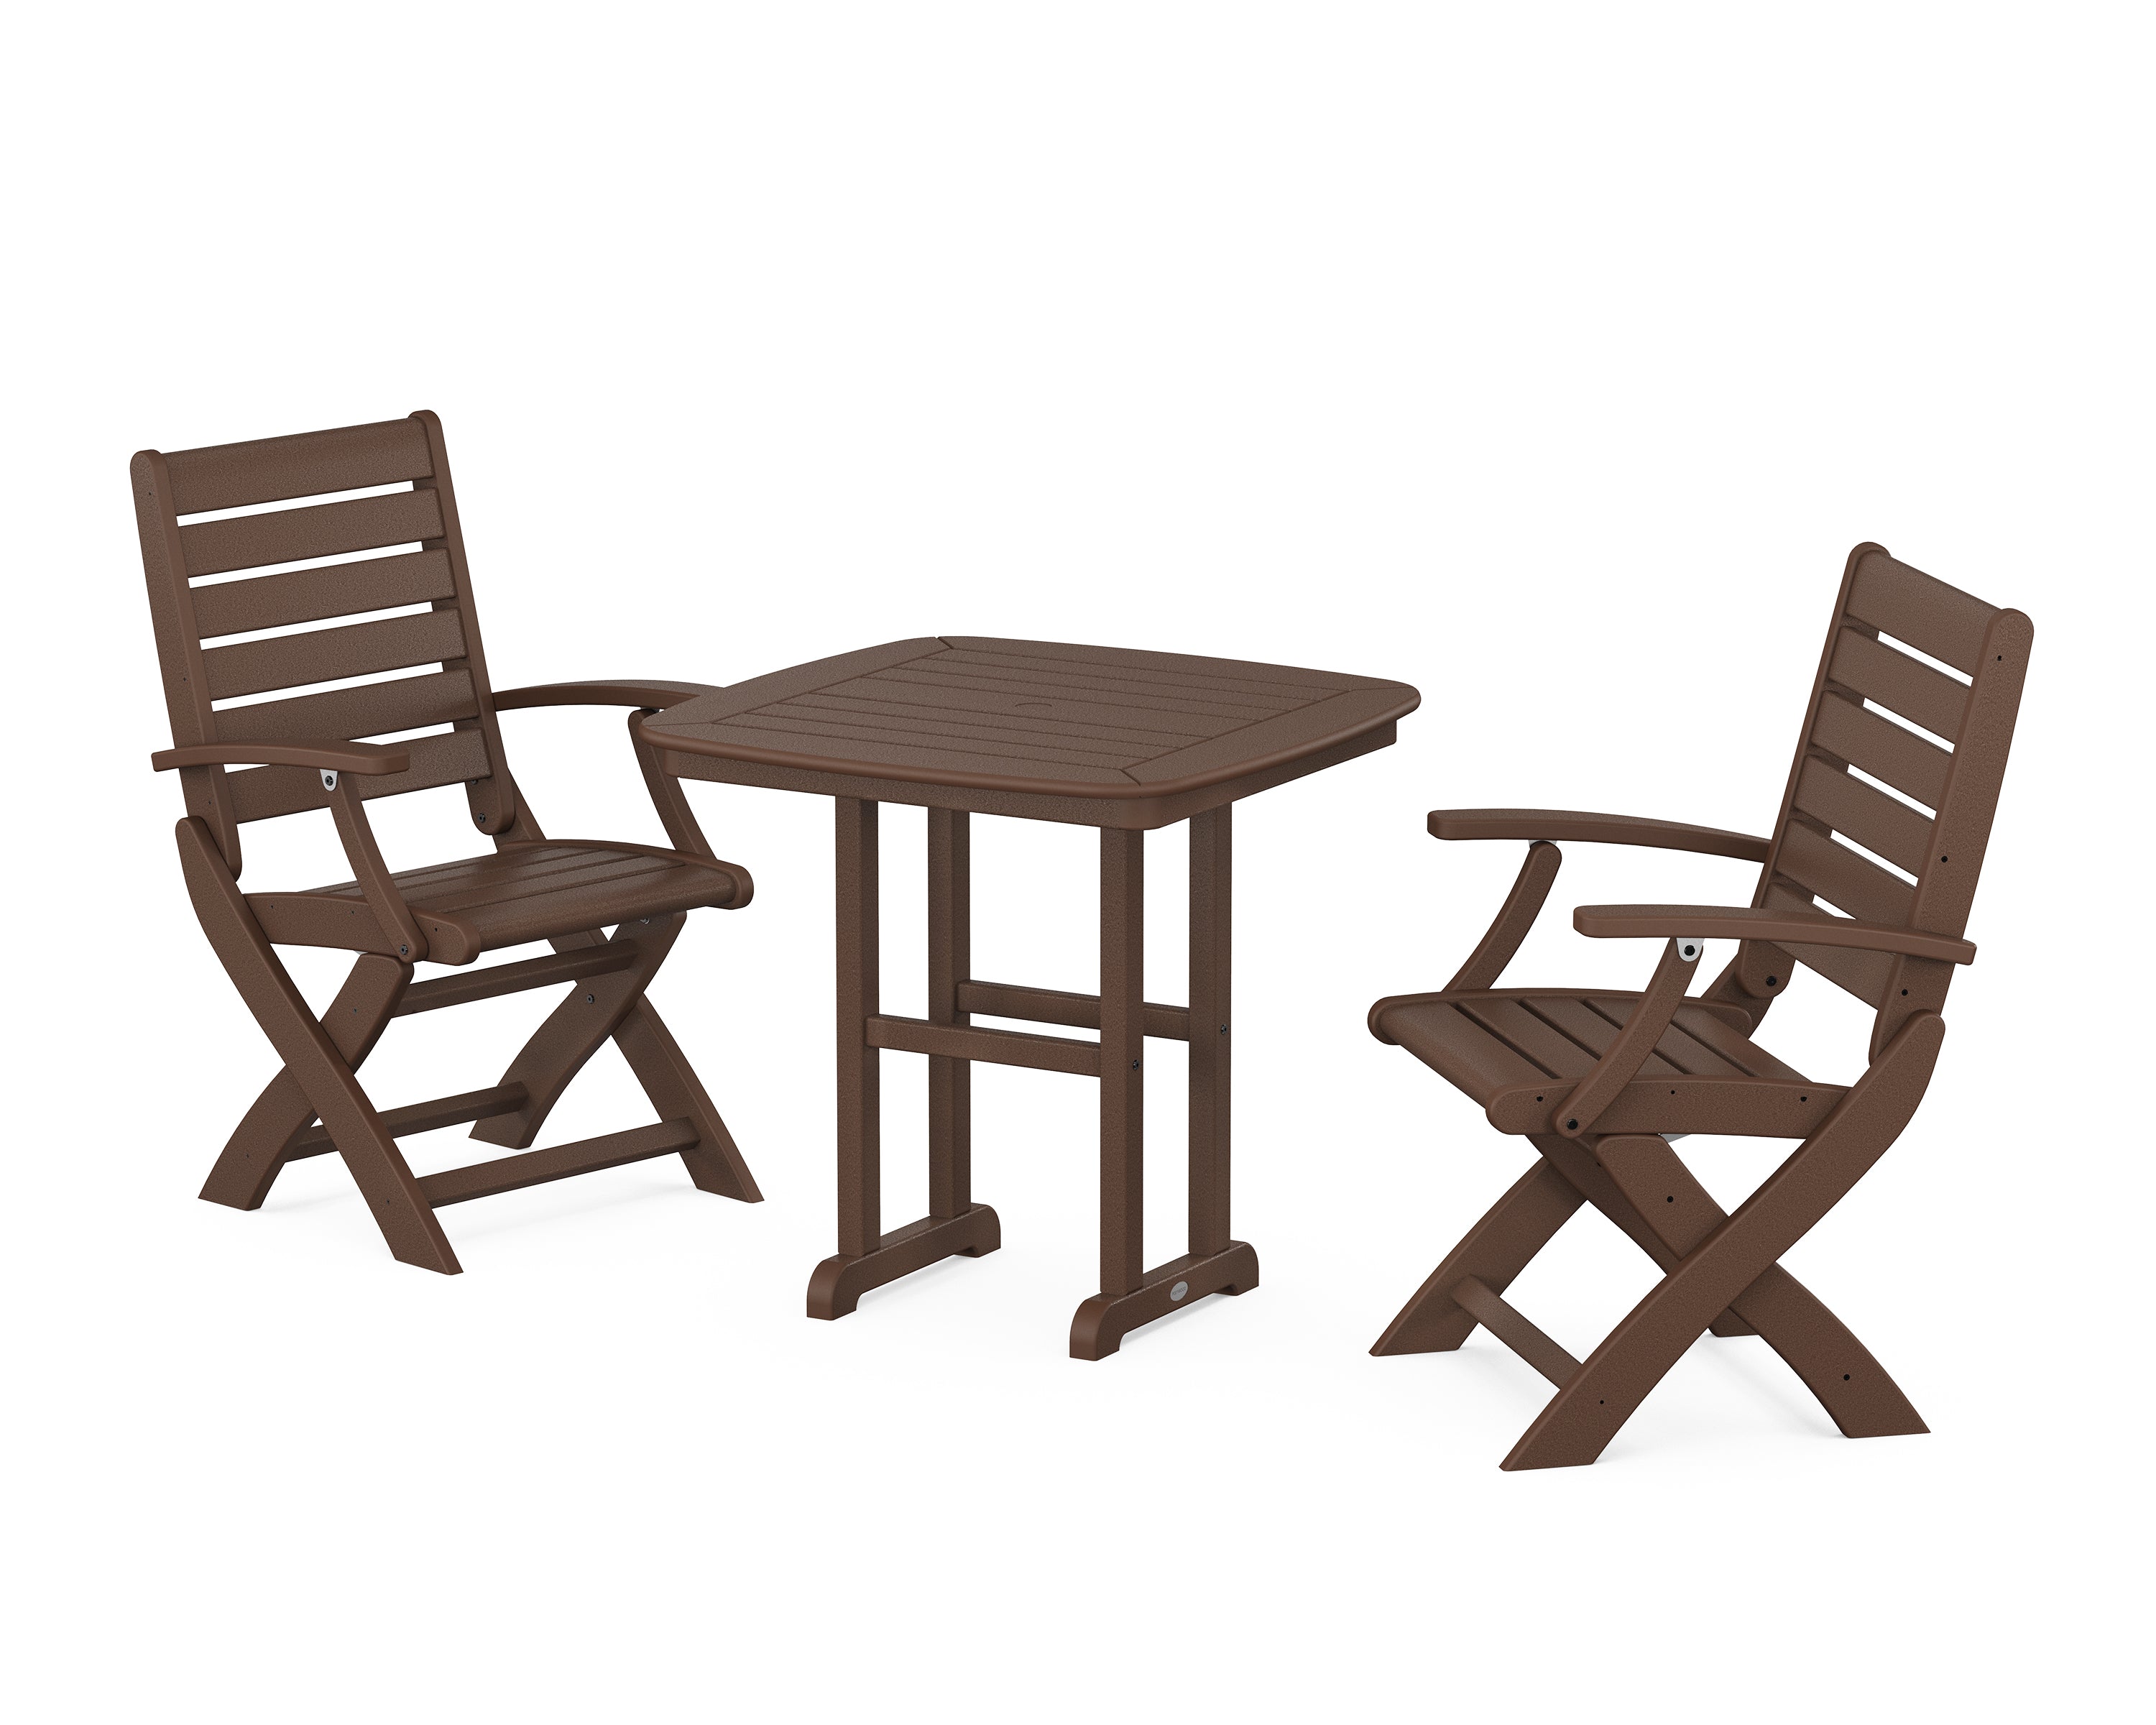 POLYWOOD® Signature Folding Chair 3-Piece Dining Set in Mahogany